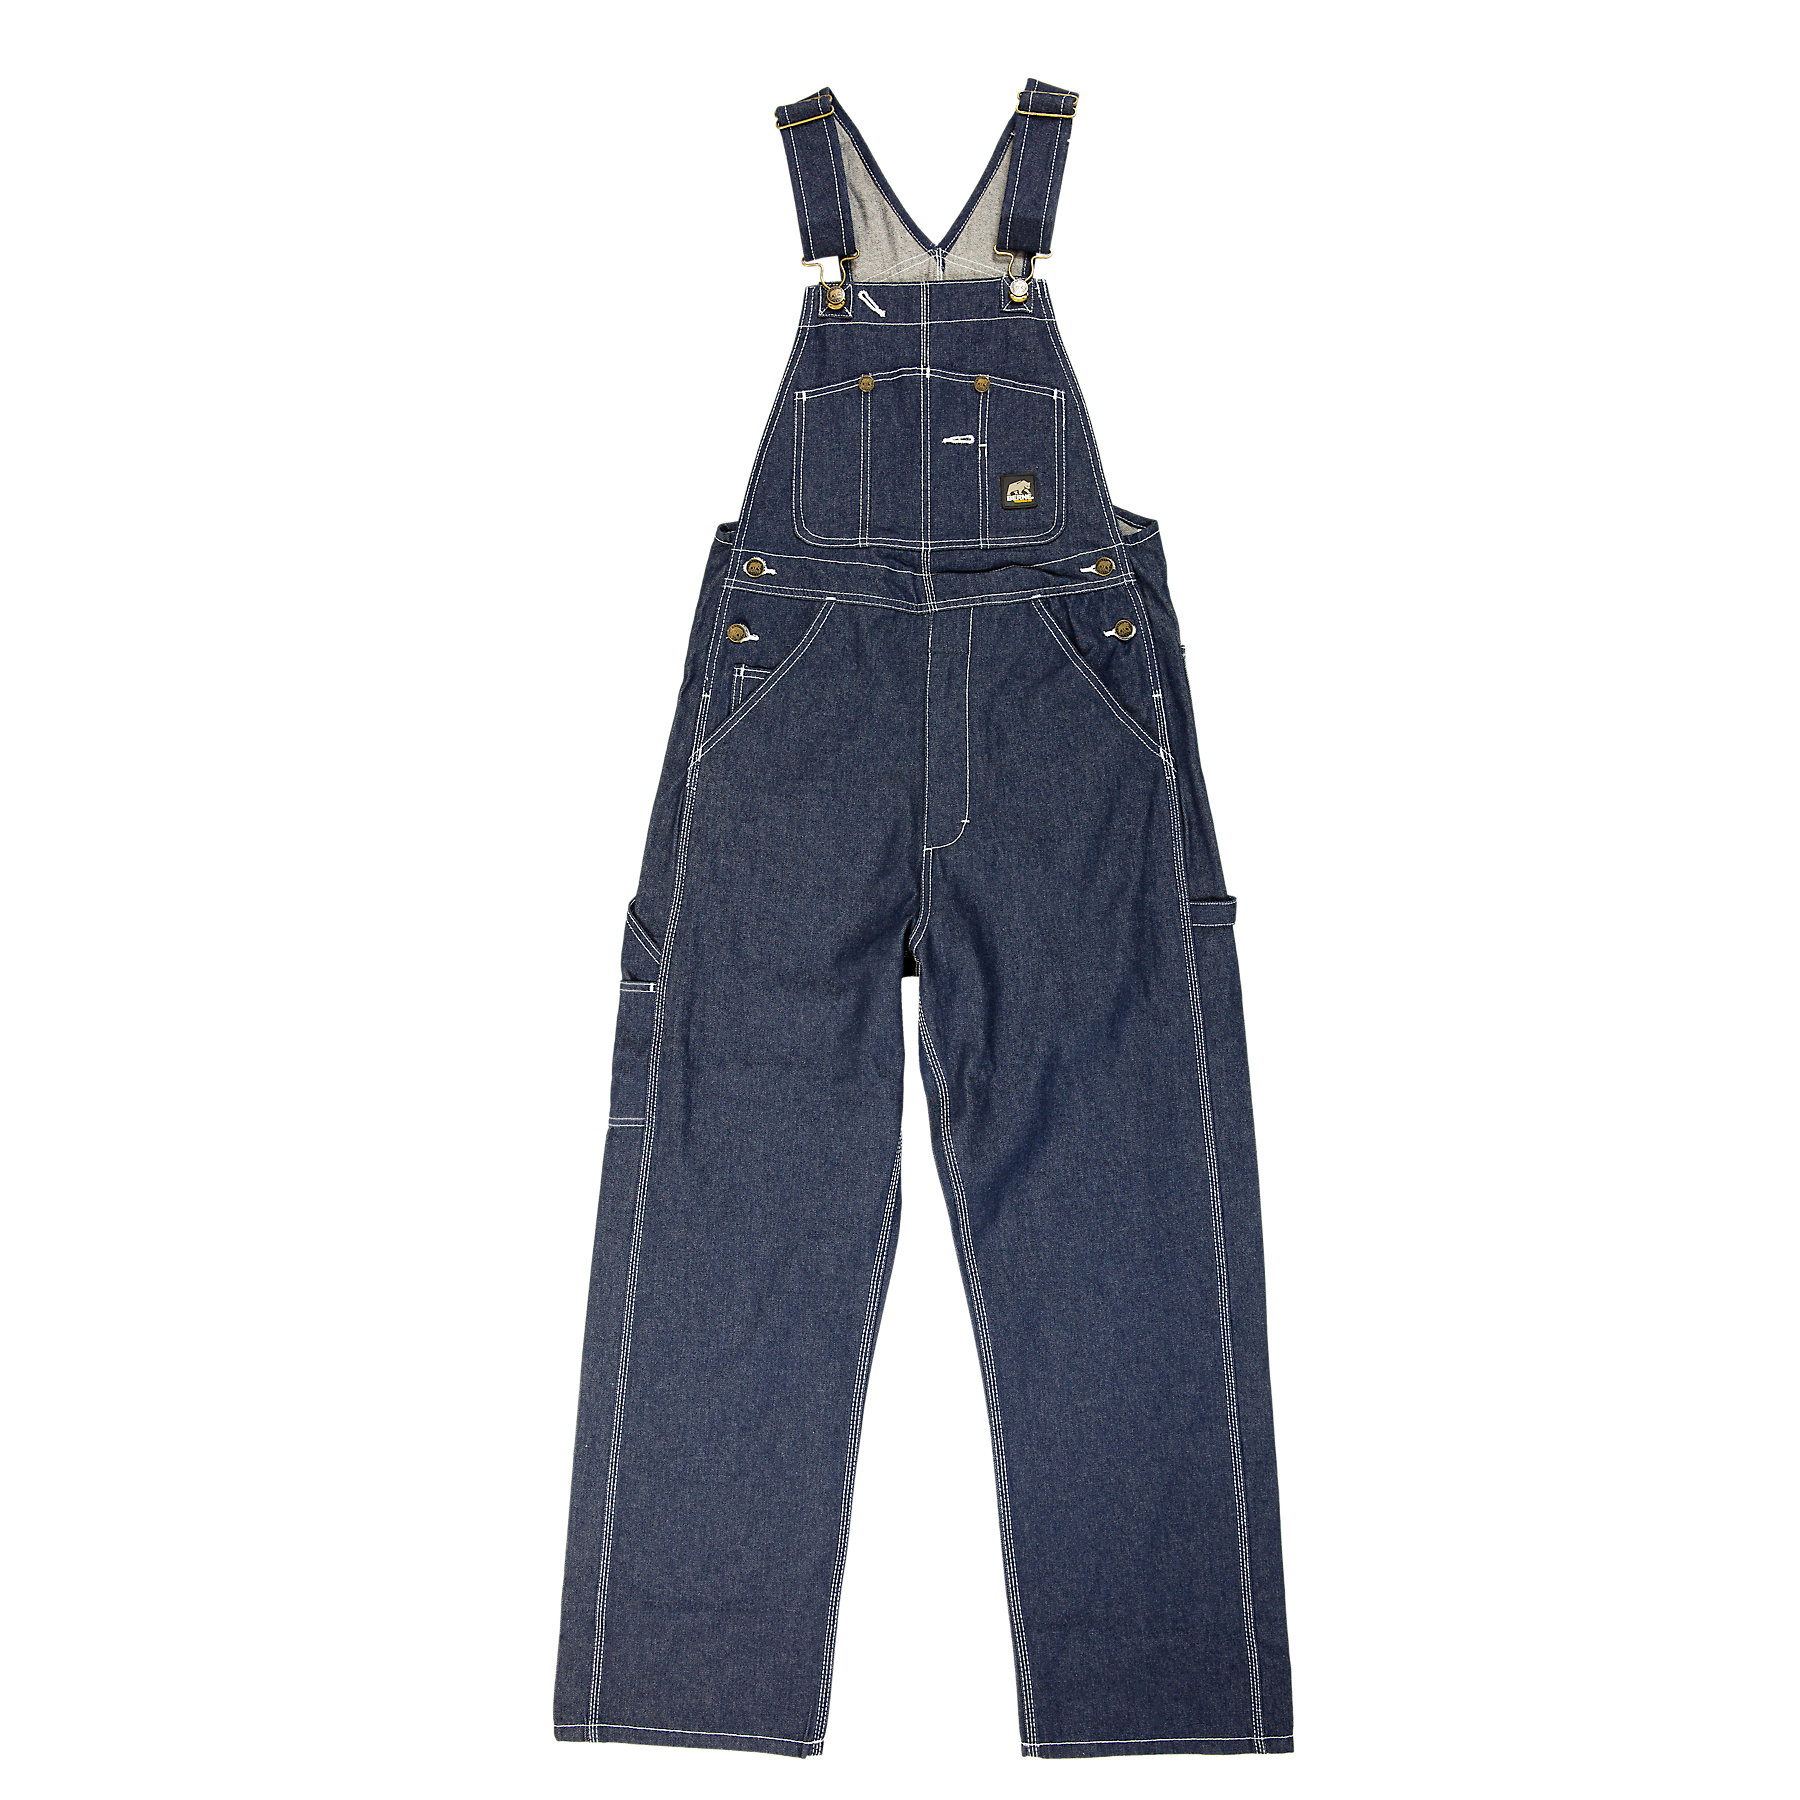 Berne Coveralls Size Chart